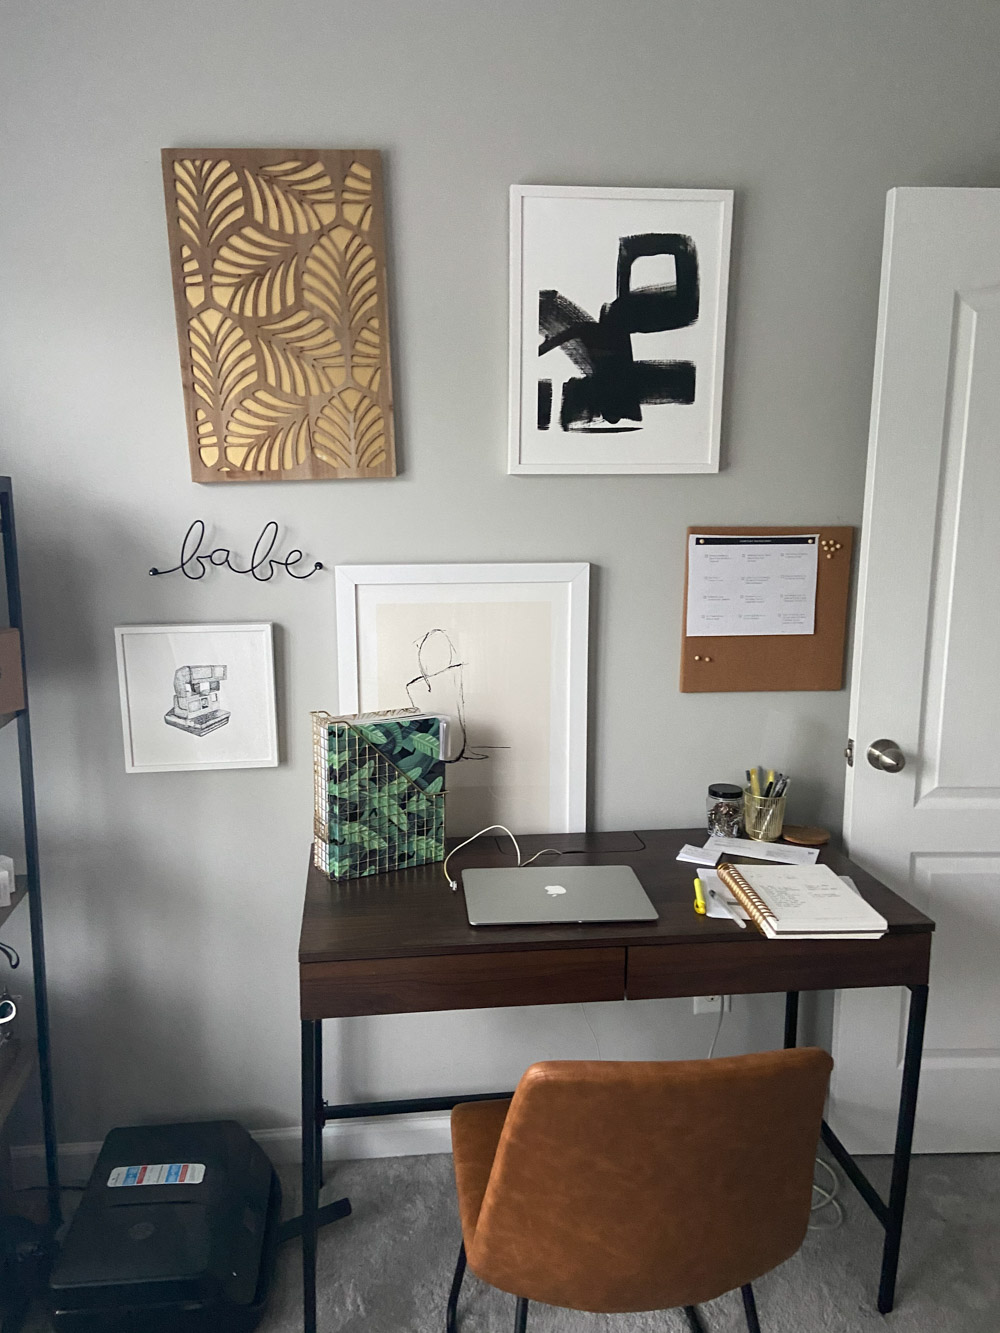 A small desk with artwork on the wall above it.